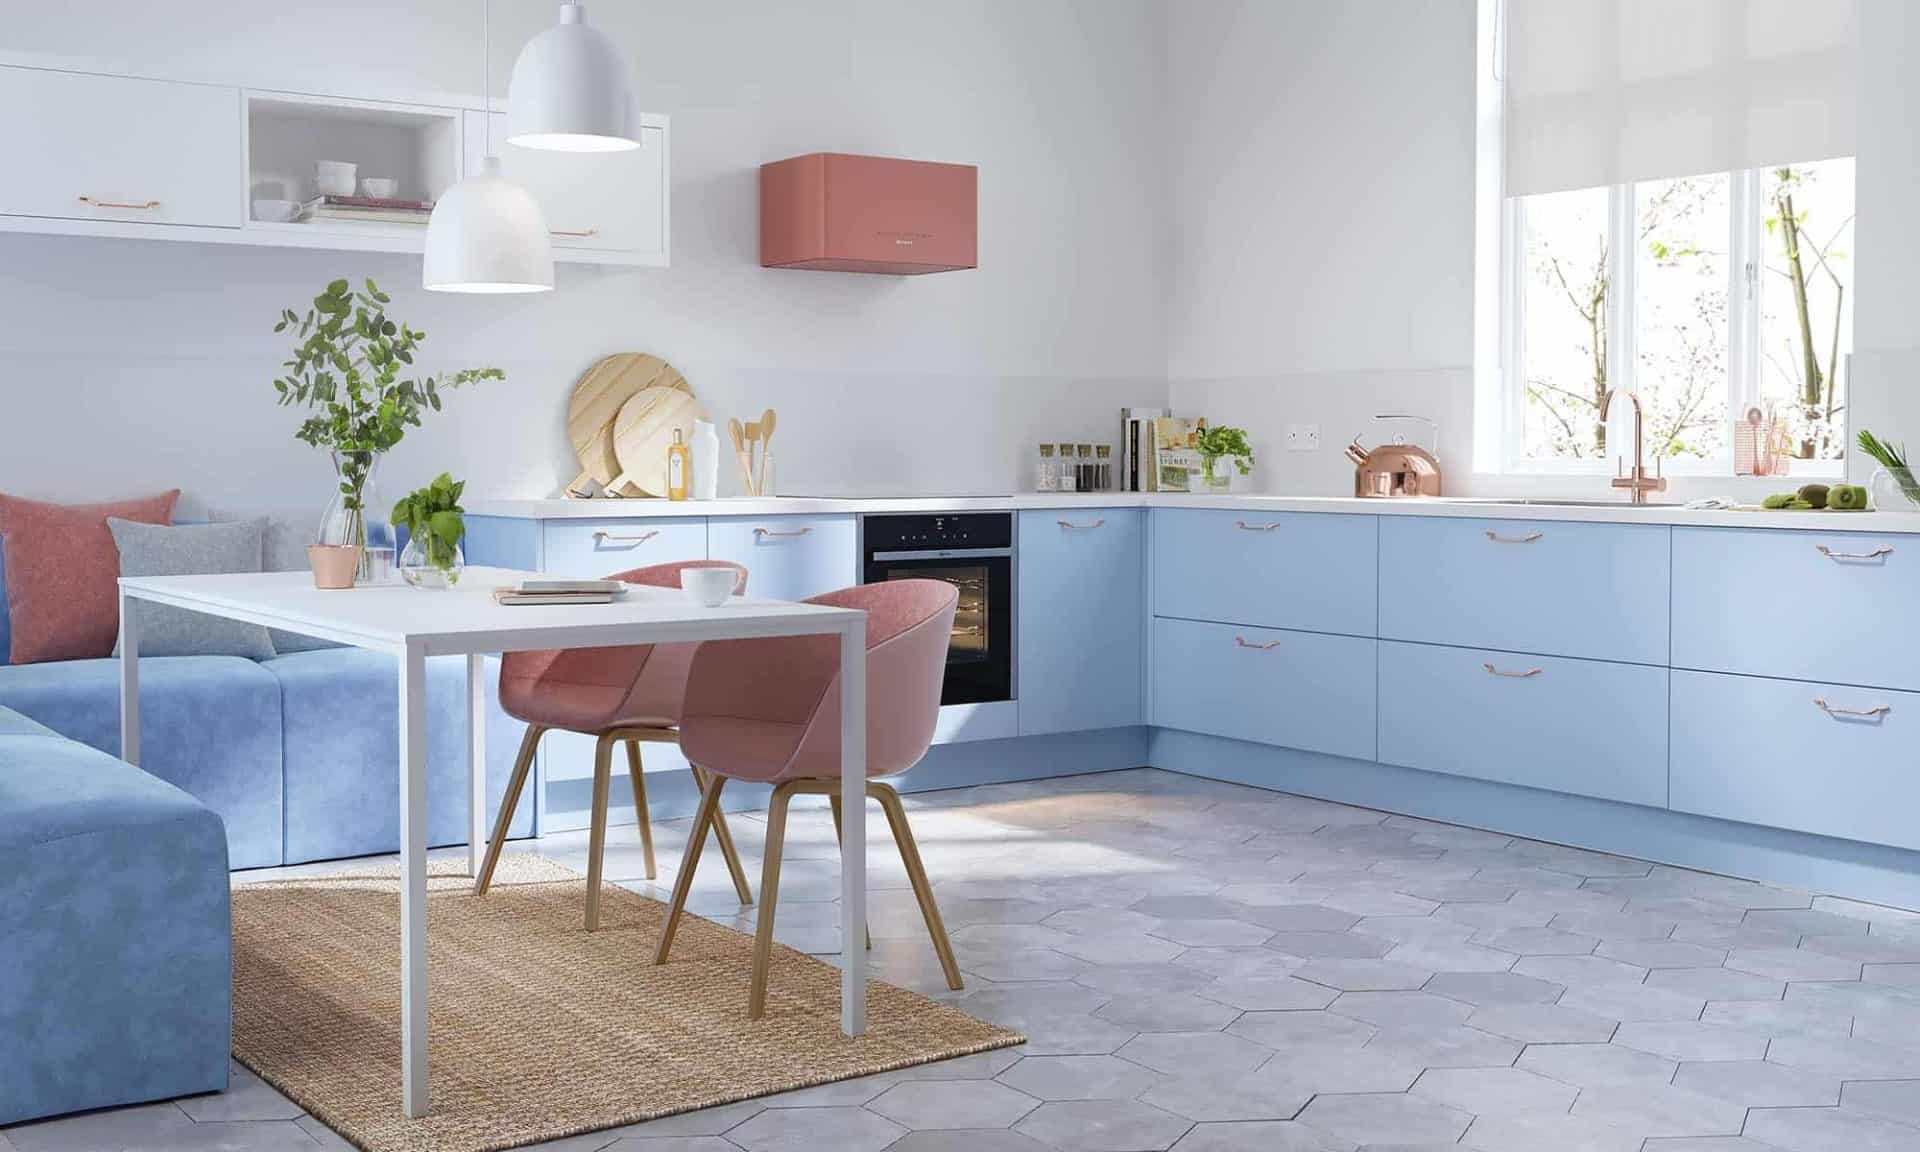 blue cooking ،e with chair, table, rug, cabinets and appliances